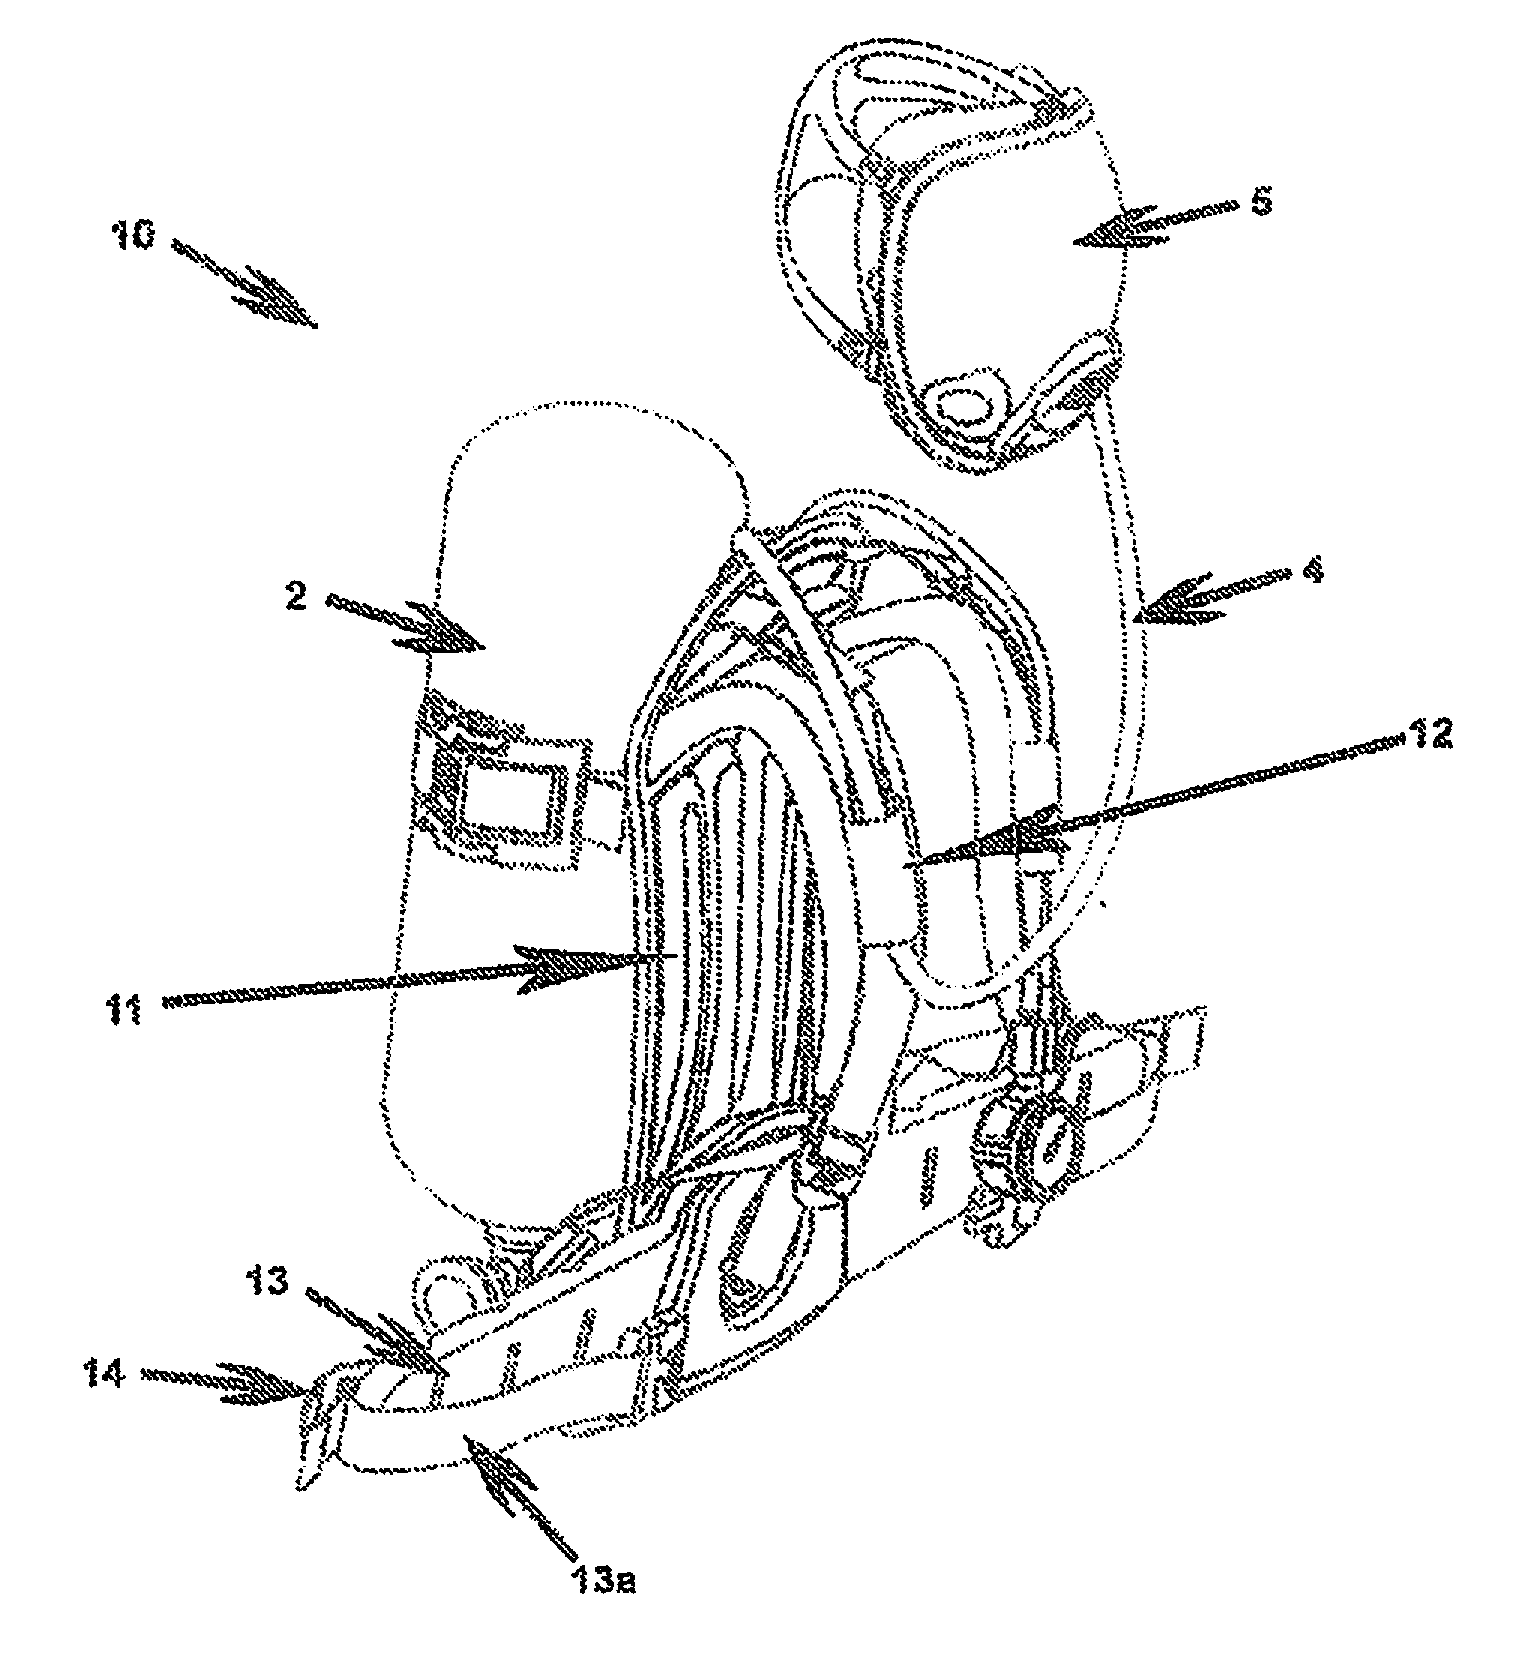 Carrying system for breathing apparatus